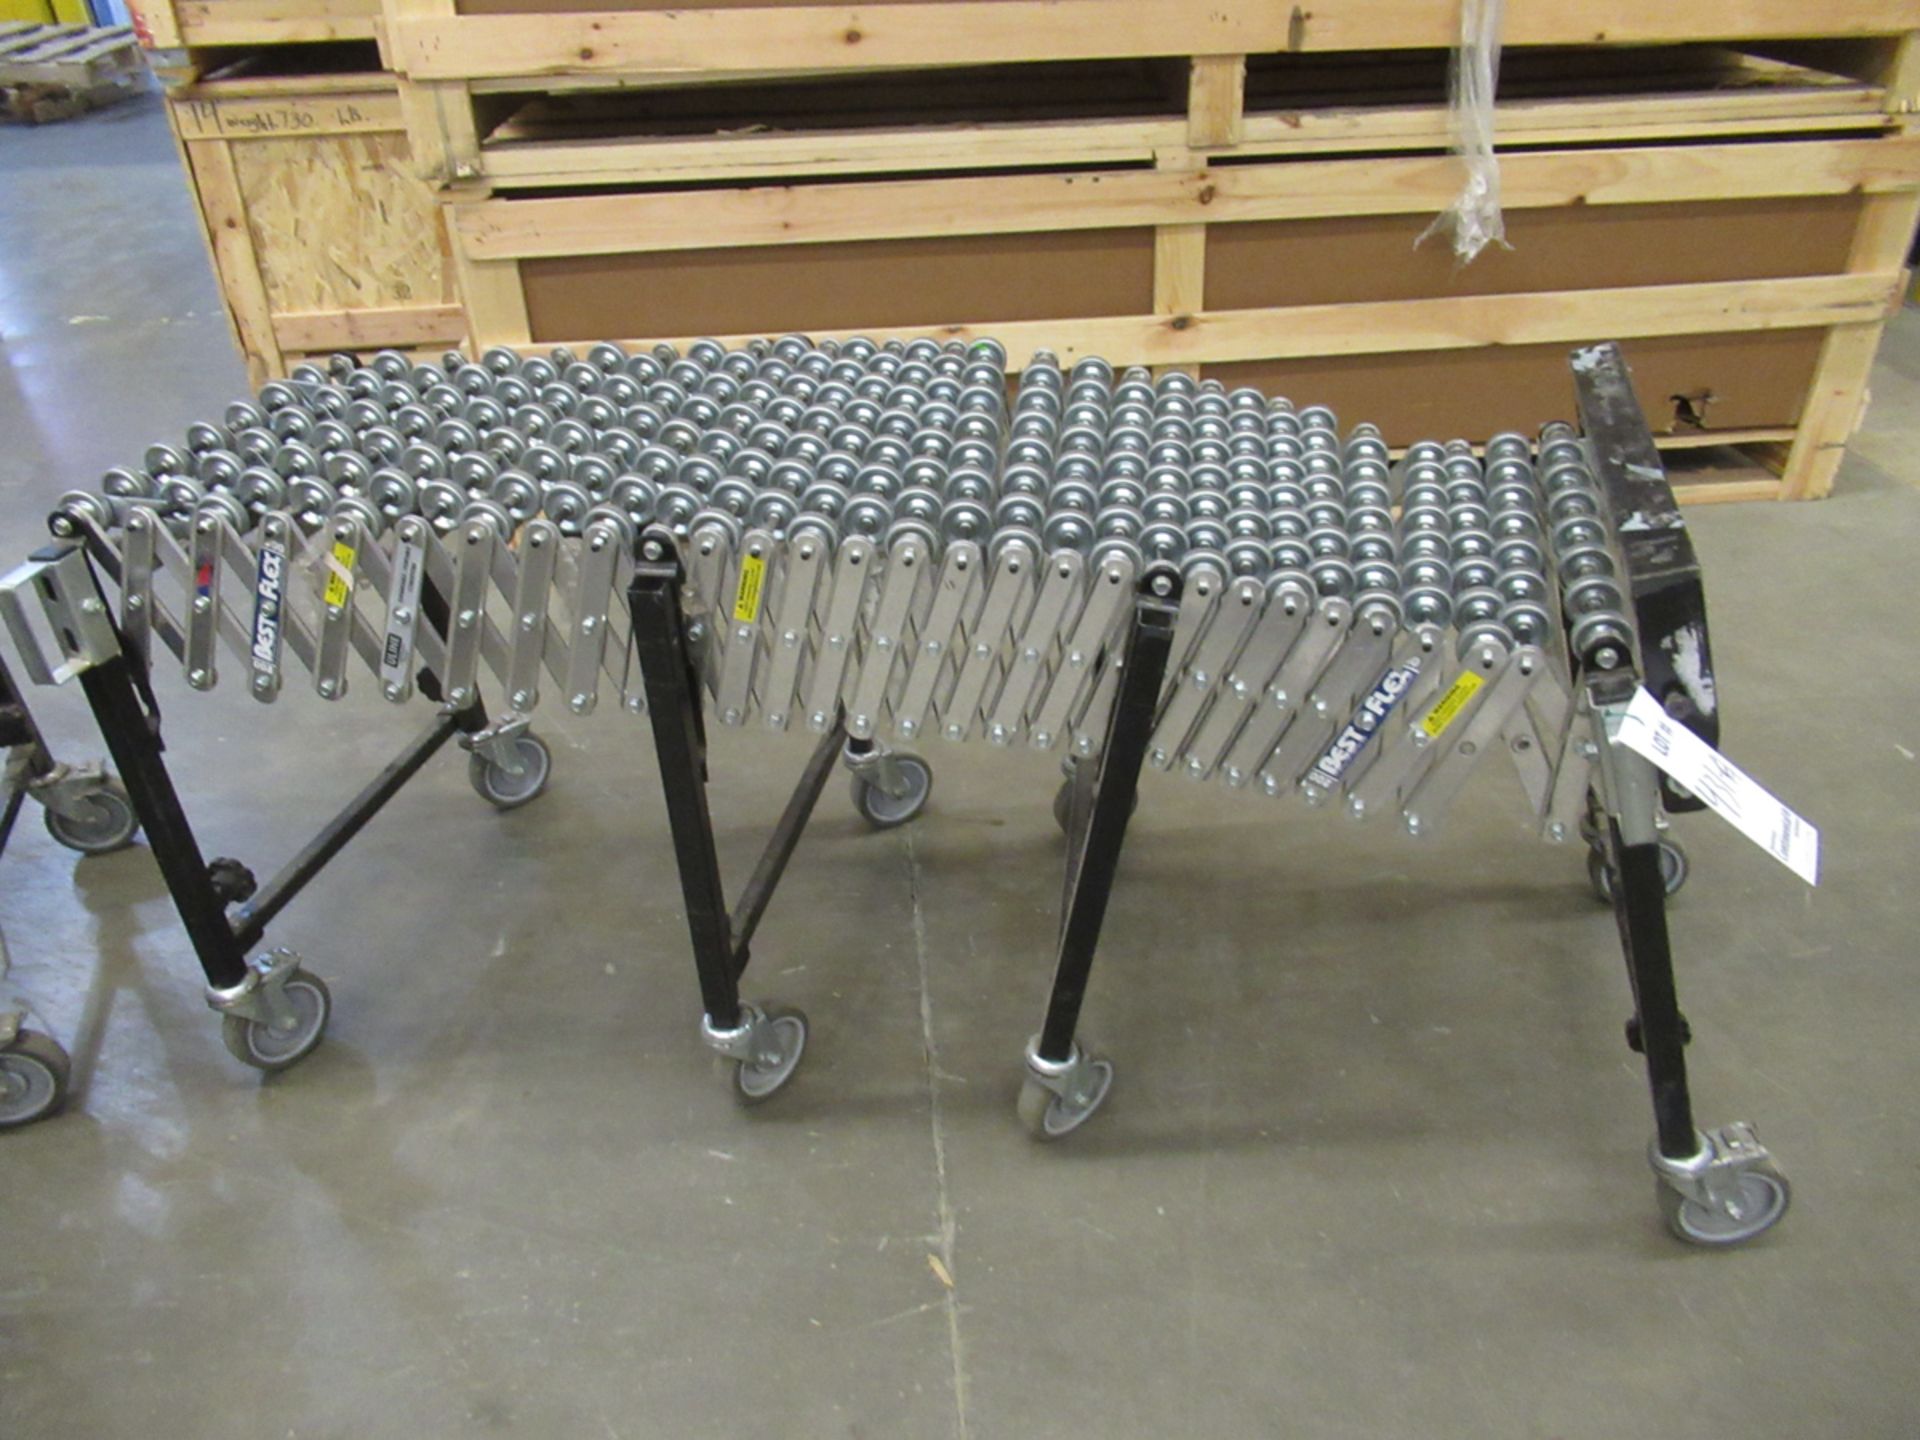 LOT OF 3 ULINE EXPANDABLE CONVEYORS - Image 3 of 3